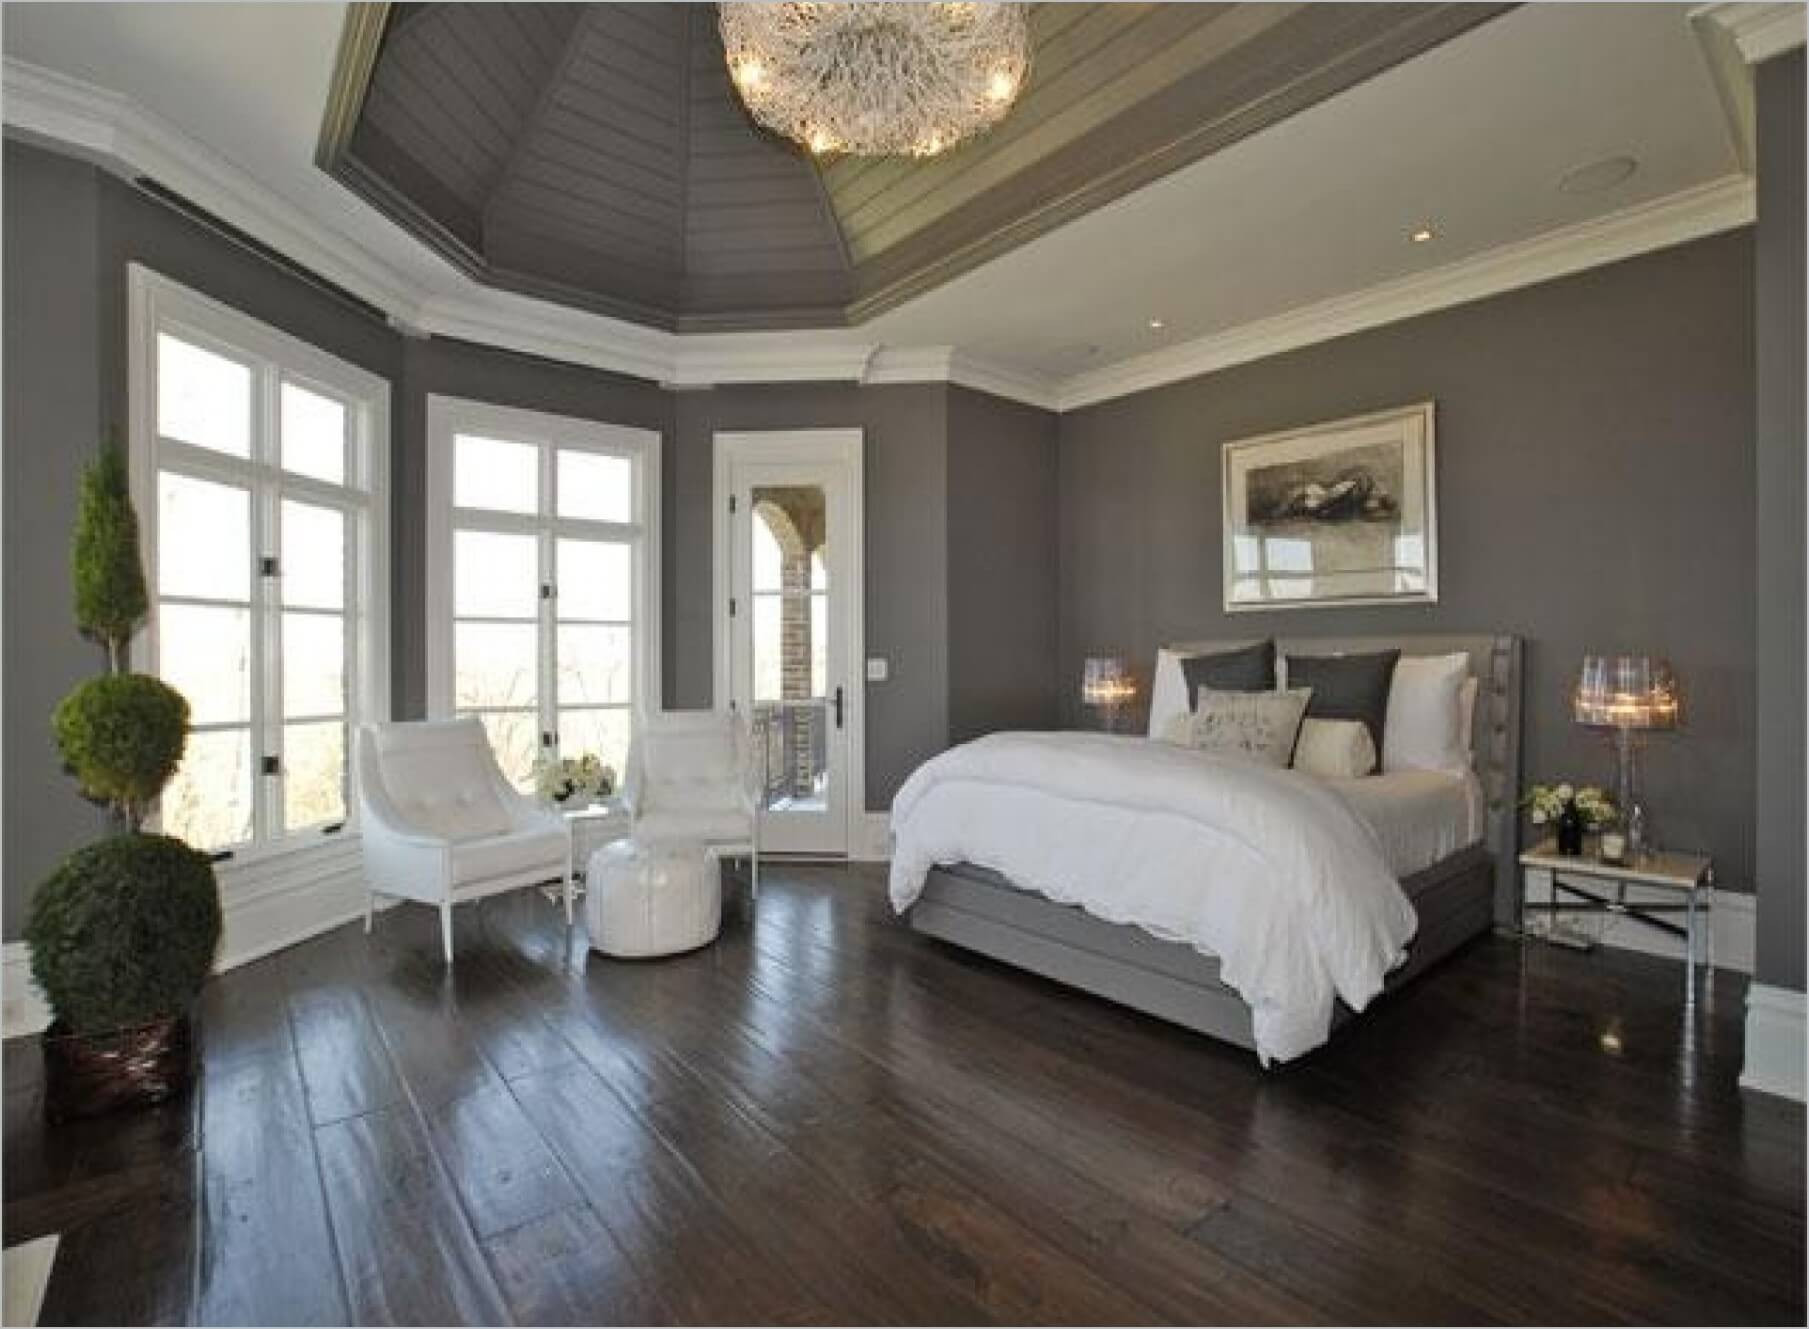 Best Colors For Master Bedroom
 20 Best Color Ideas for Bedrooms 2018 Interior